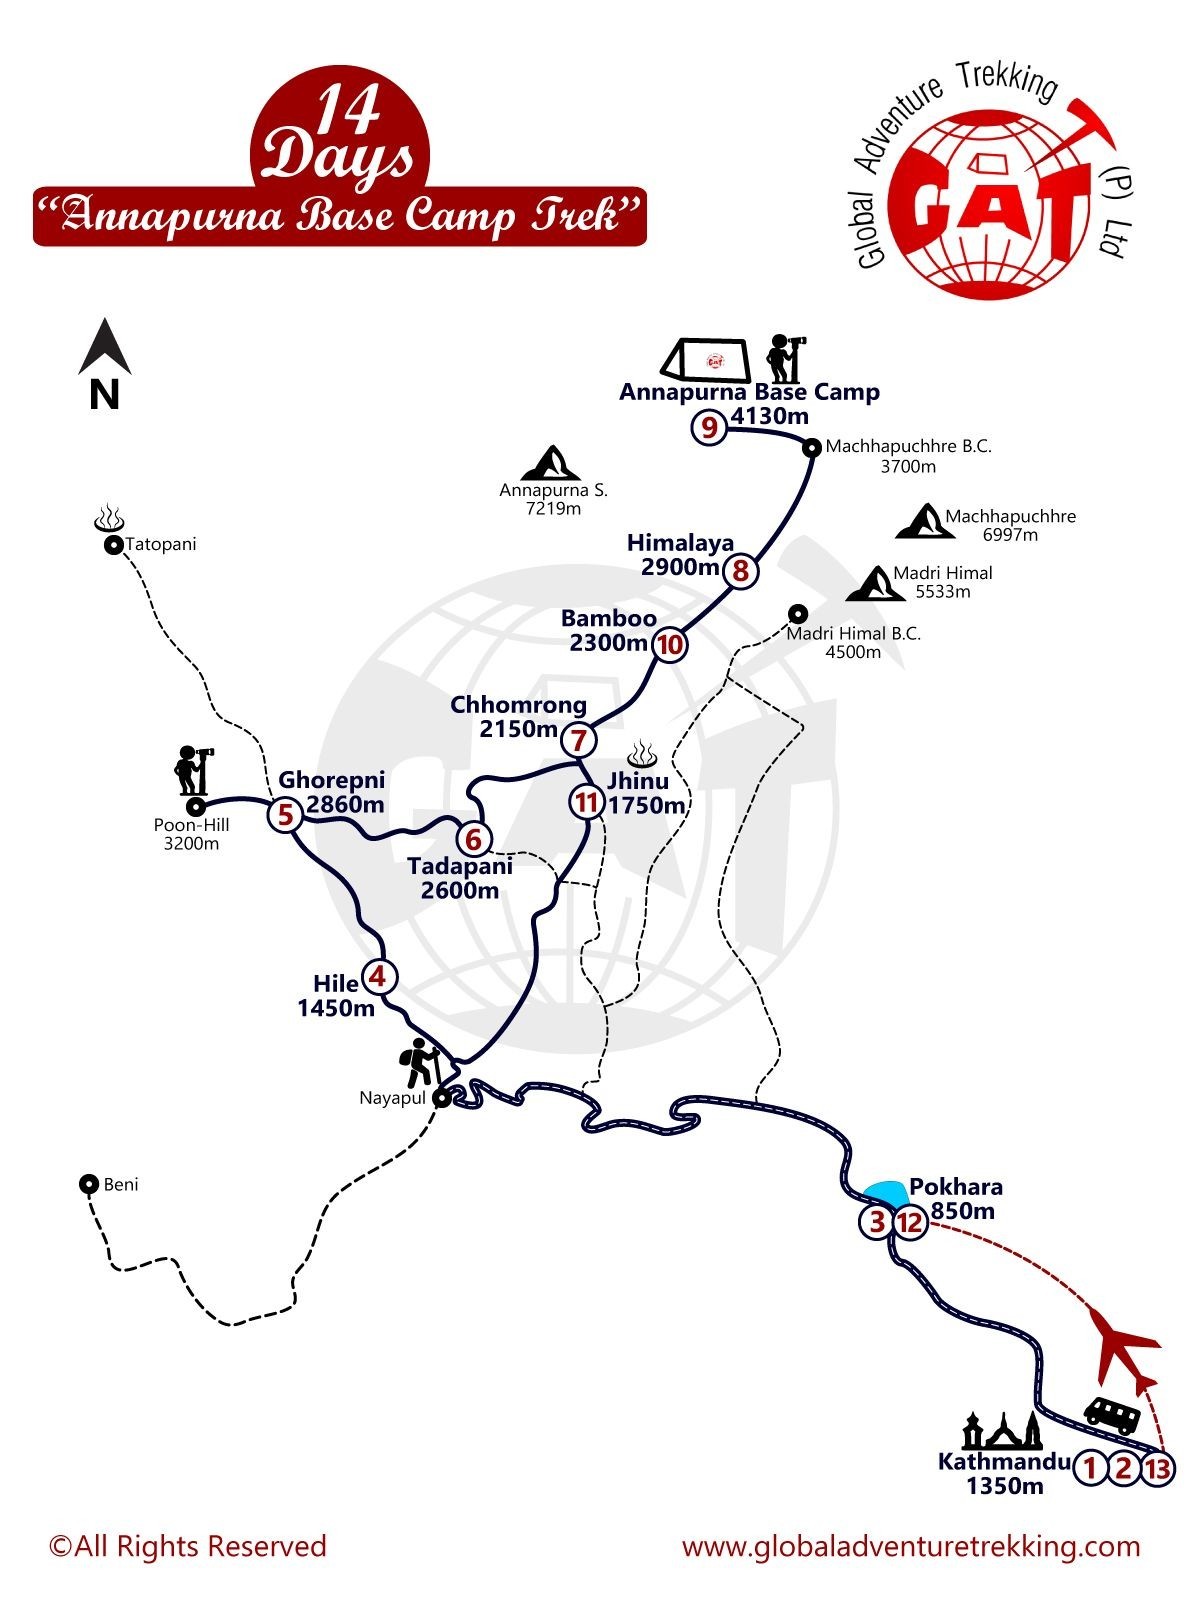 Annapurna Base Camp Trek Cost and Itinerary-13 days map